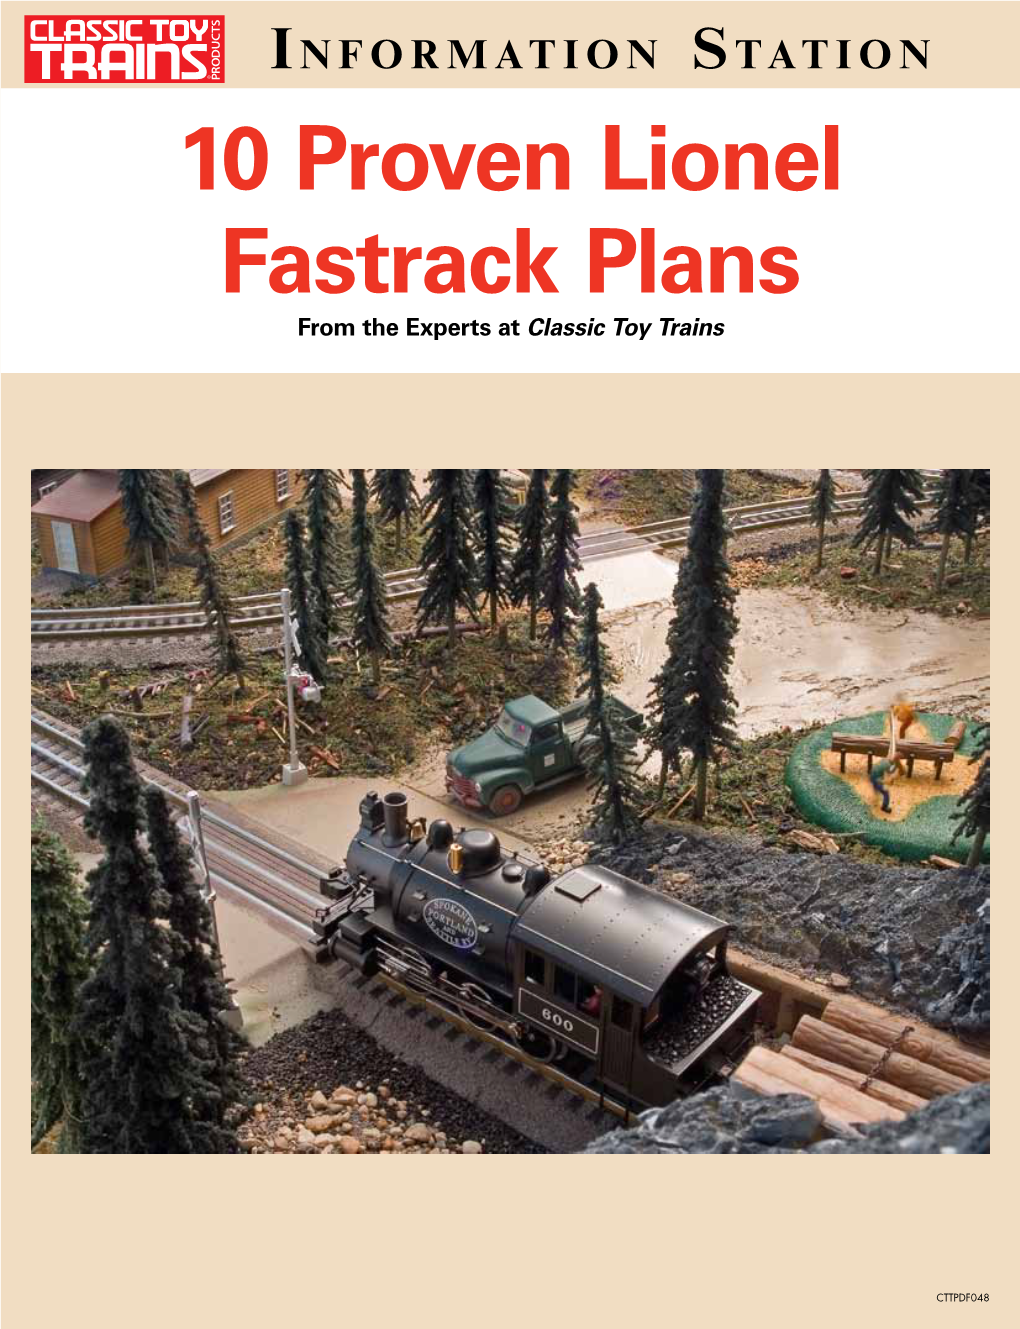 Lionel Fastrack Plans from the Experts at Classic Toy Trains